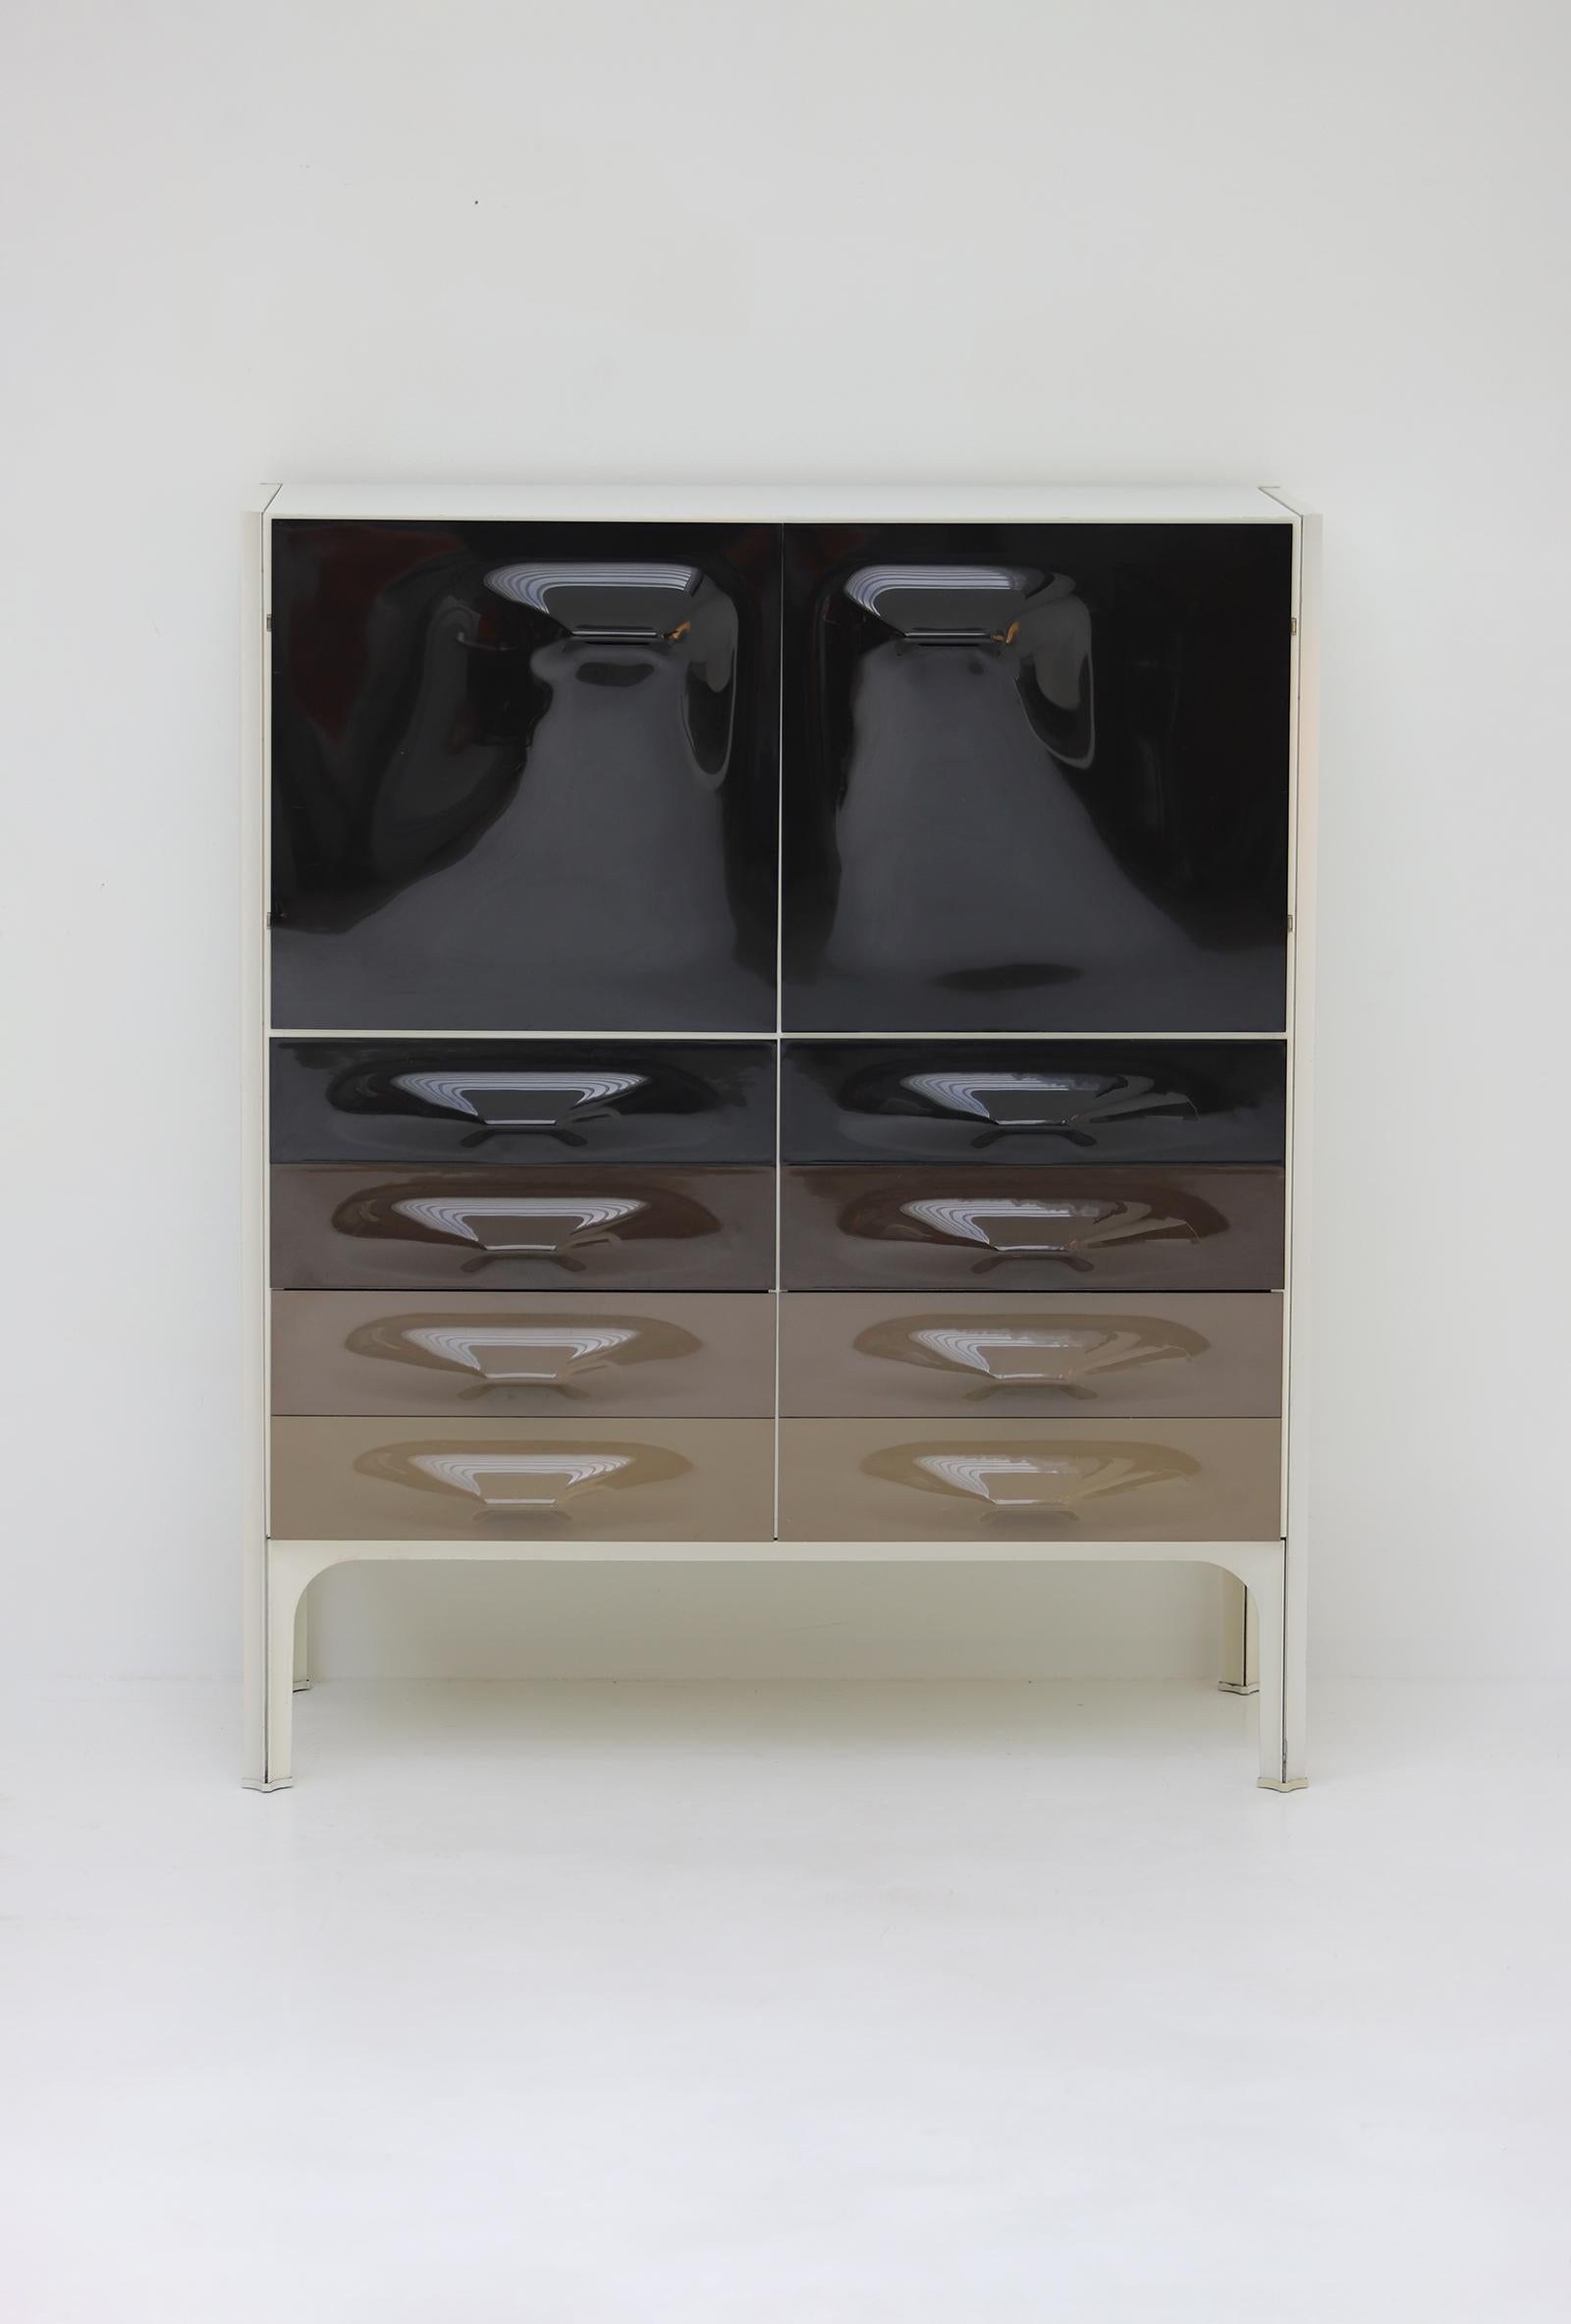 French Modern space age DF2000 cabinet by Raymond Loewy for Doubinsky Frères in 1968.